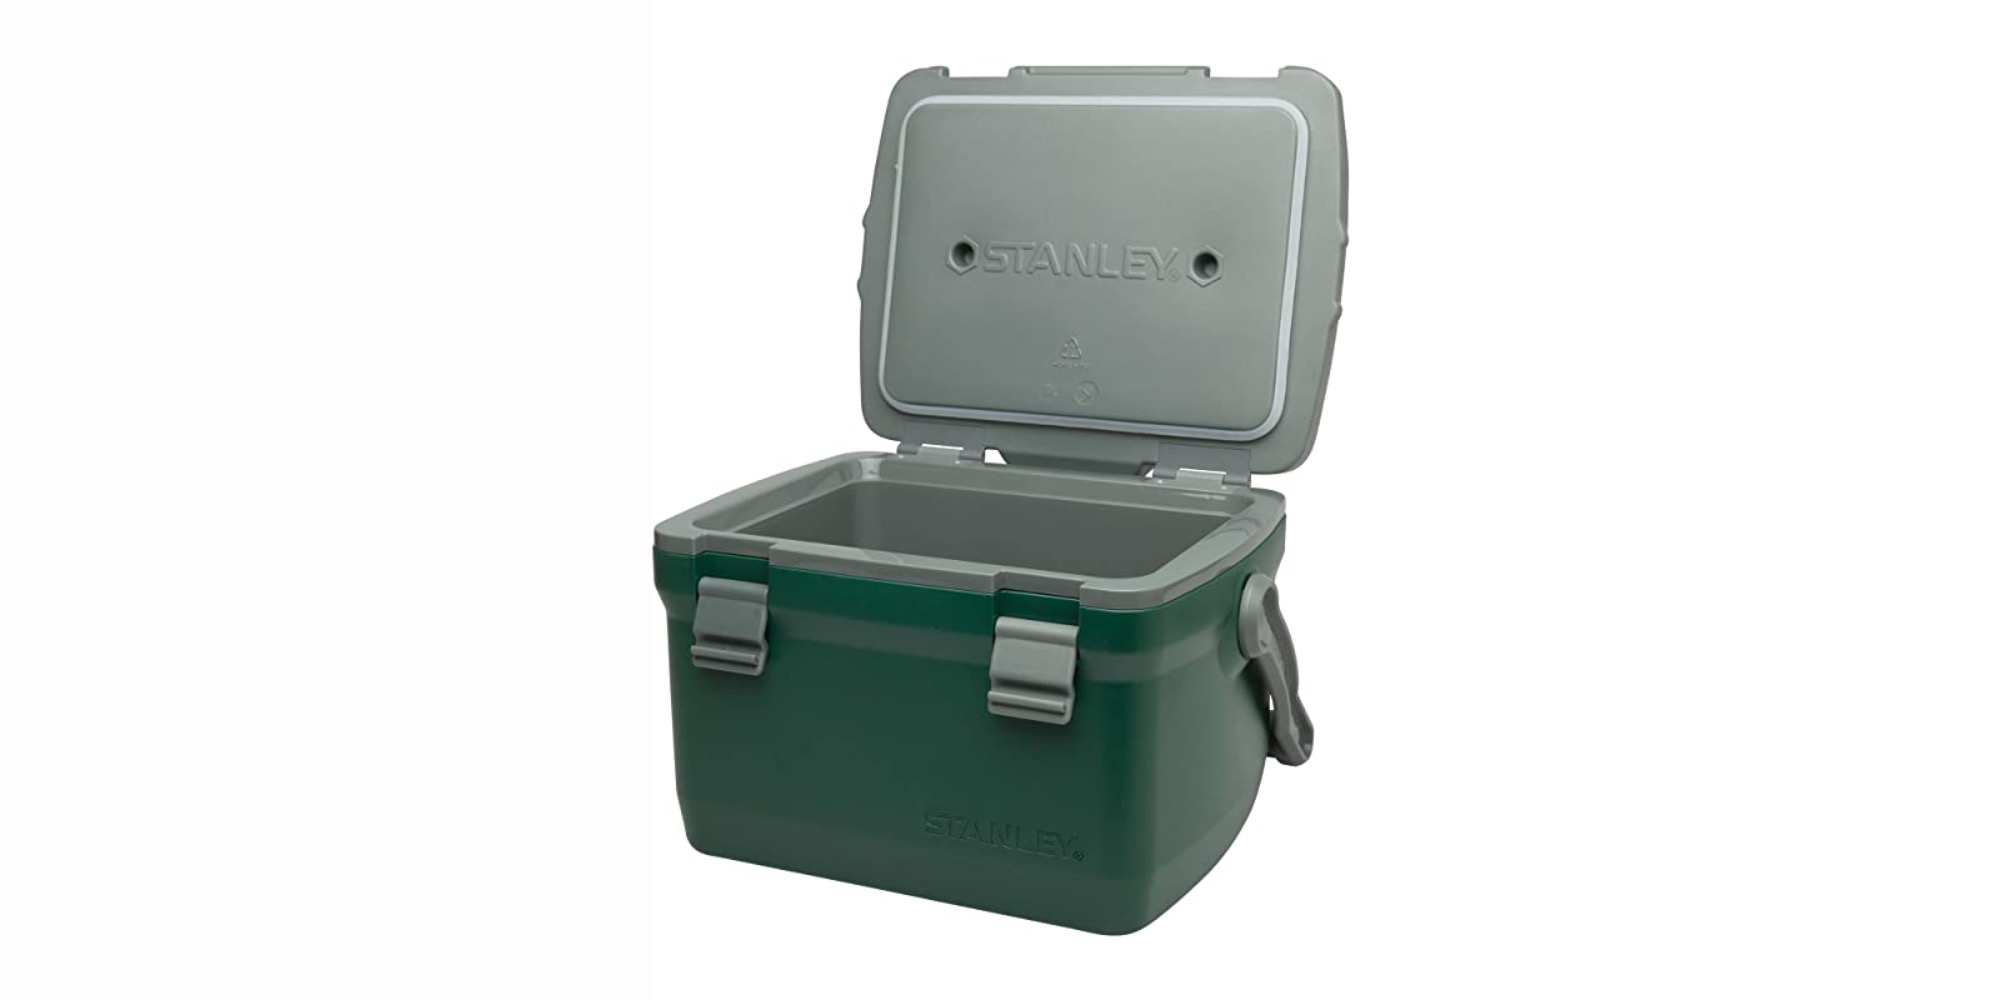 WORK 'n MORE - STANLEY ADVENTURE EASY CARRY LUNCH COOLER 7 QT- STANLEY GREEN